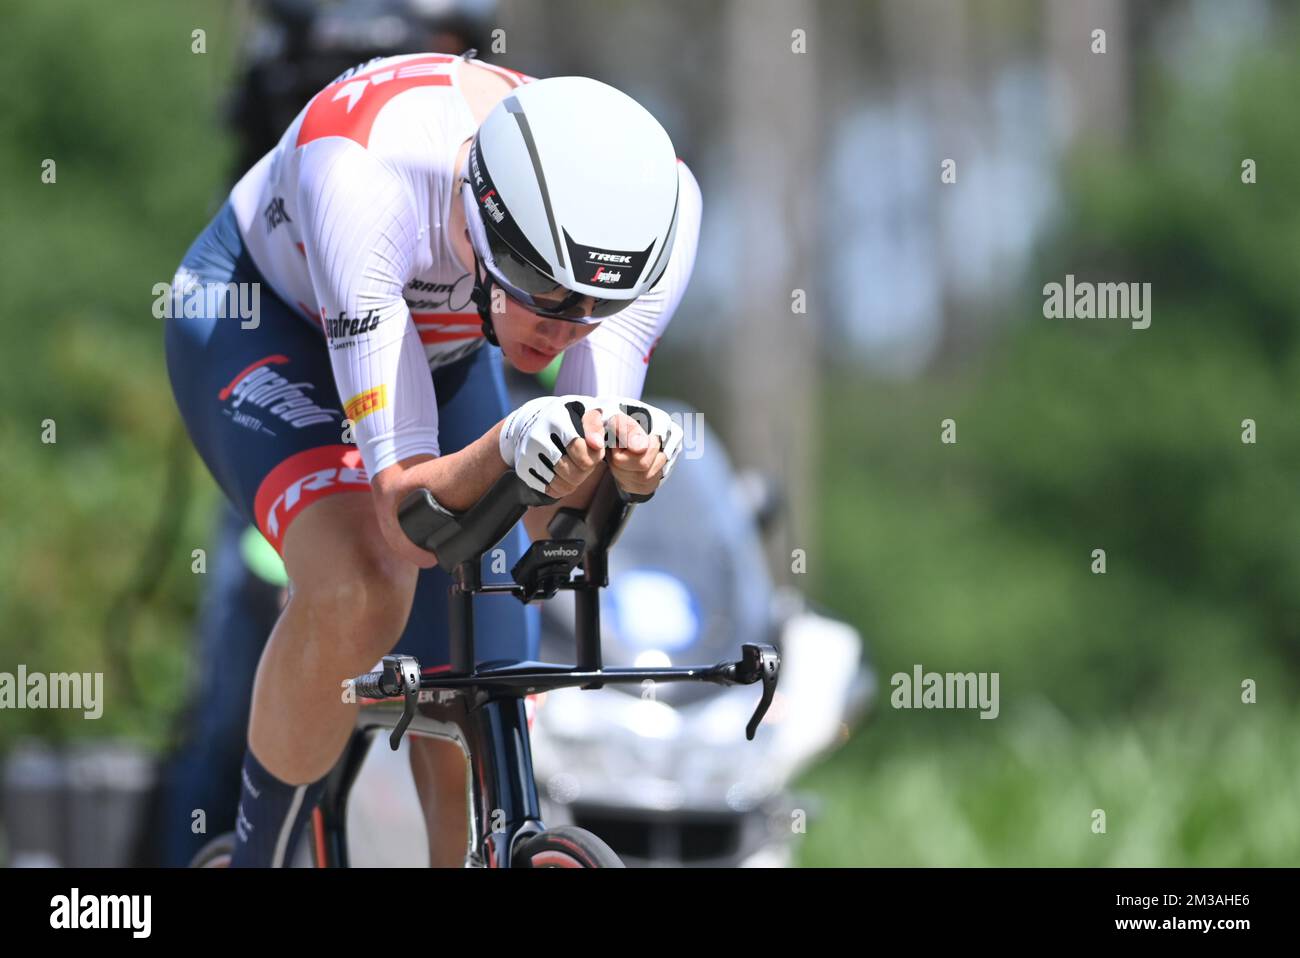 Dutch Daan Hoole of Trek-Segafredo pictured in action during the third stage of the Baloise Belgium Tour cycling race, an individual time trial of 11,8km from and to Scherpenheuvel-Zichem, Friday 17 June 2022. The Baloise Belgium Tour takes place from 15 to 19 June. BELGA PHOTO DAVID STOCKMAN  Stock Photo